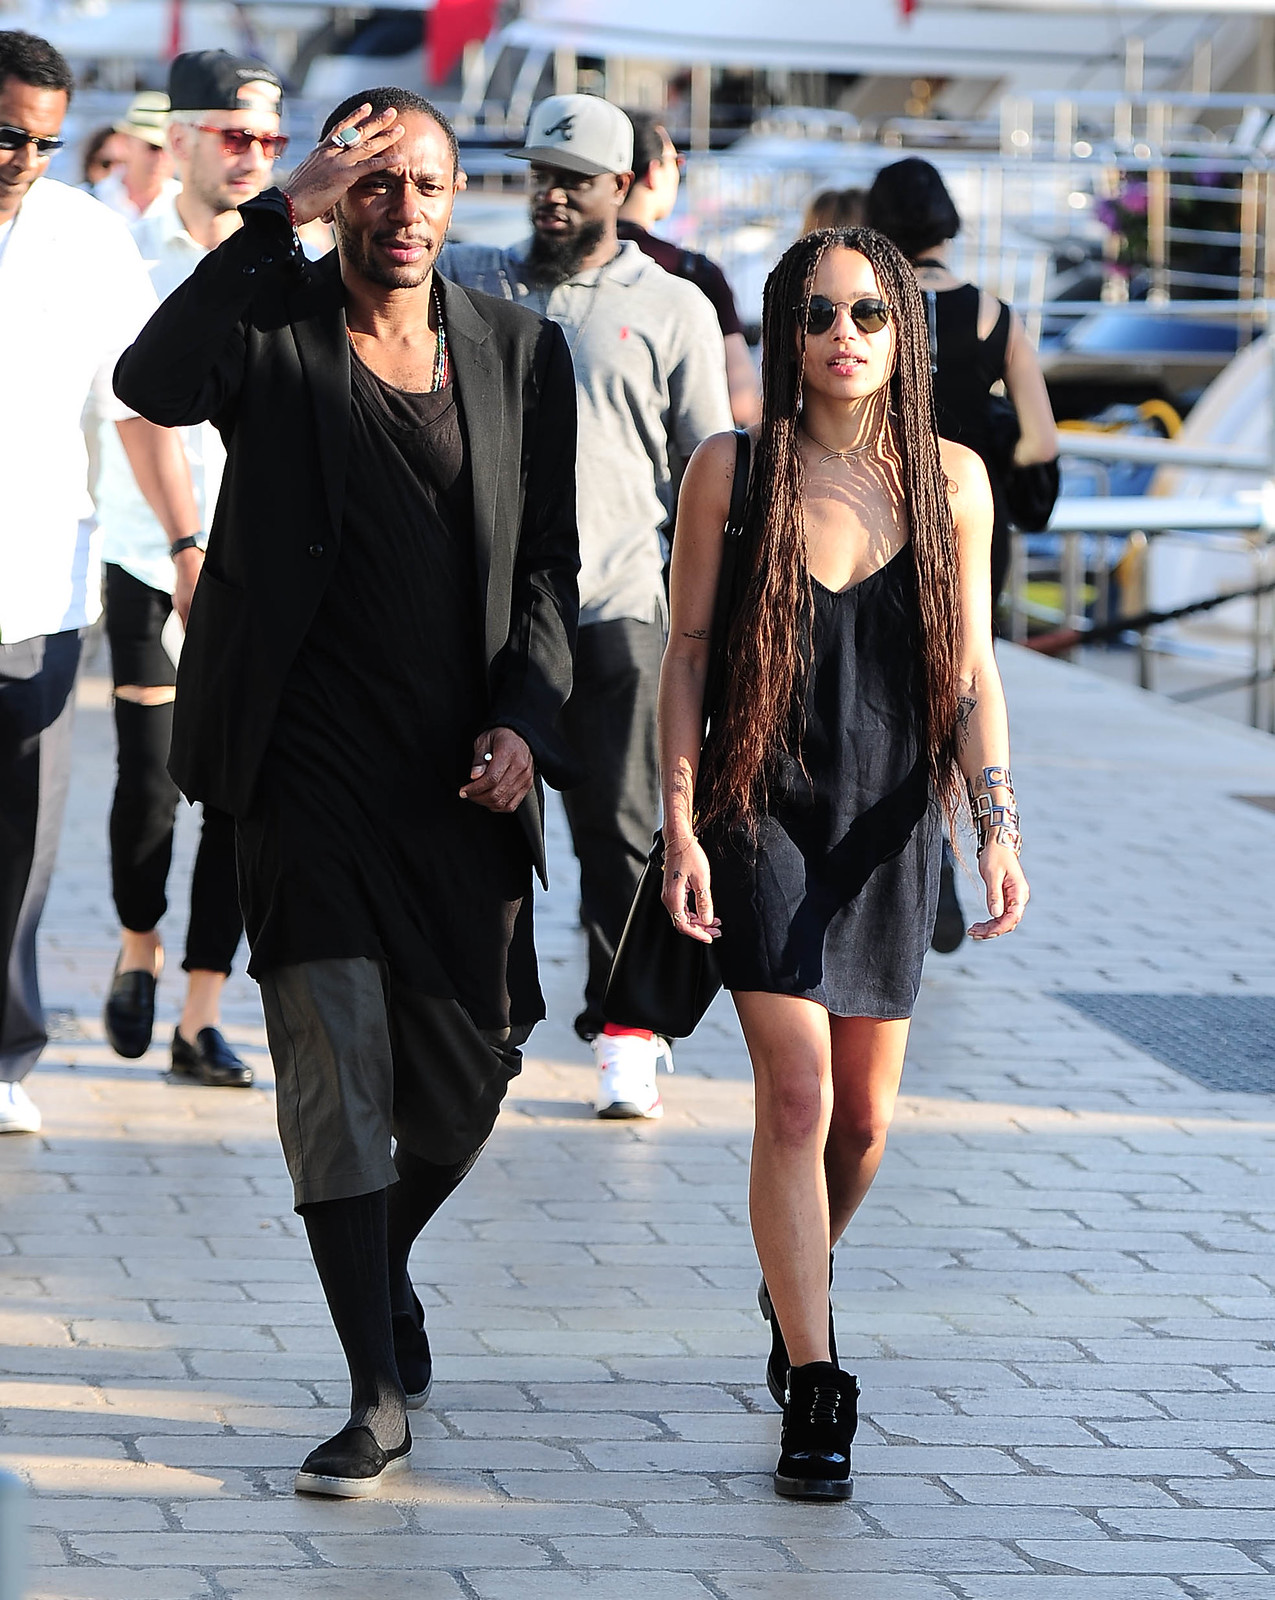 Zoe Kravitz and Yasiin Bey at the 68th Annual Cannes Film Festival